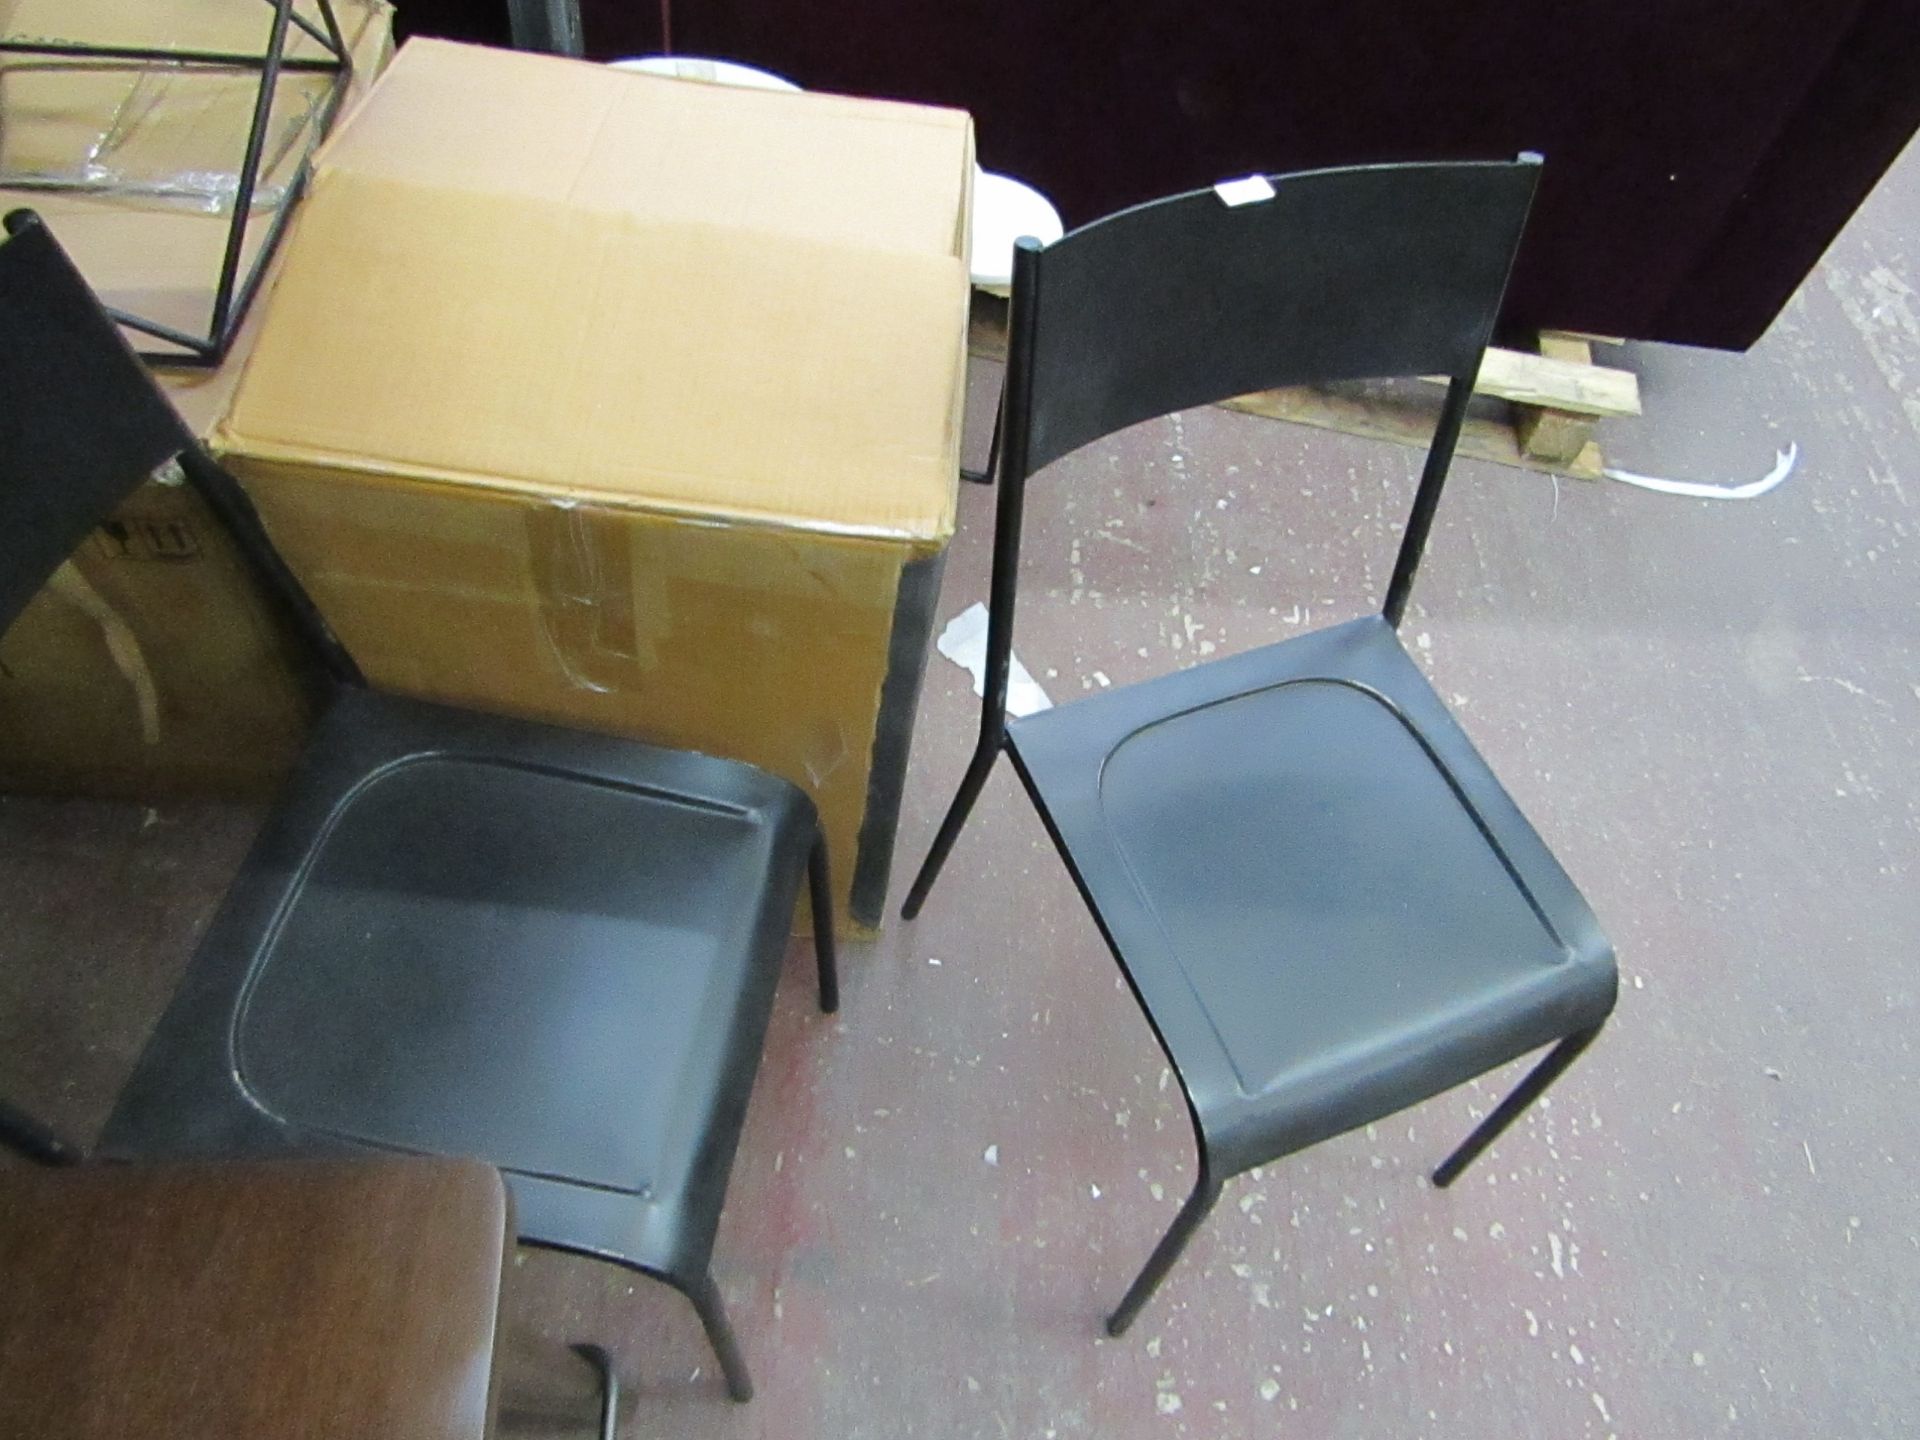 Swoon set of 2 Buckley metal dining chairs in Black, with box, RRP £199, the chairs have sme surface - Image 2 of 2